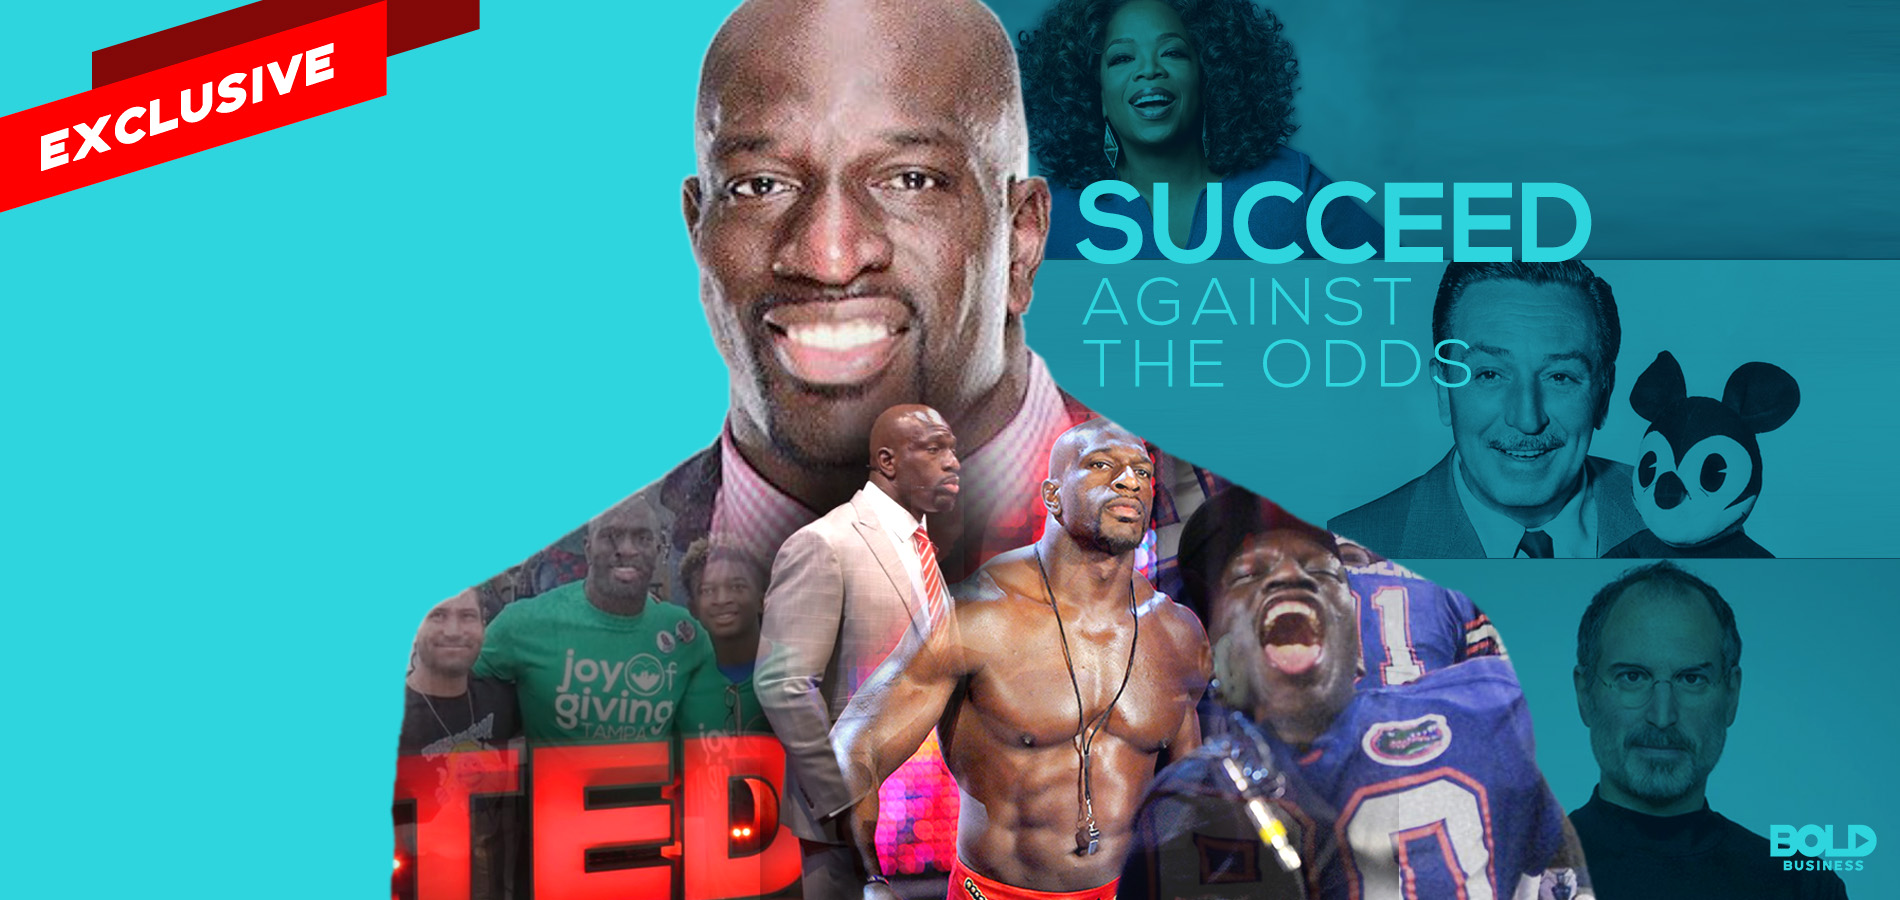 How Can Your Business Persevere Against All Odds? Lessons from WWE Star Titus O’Neil